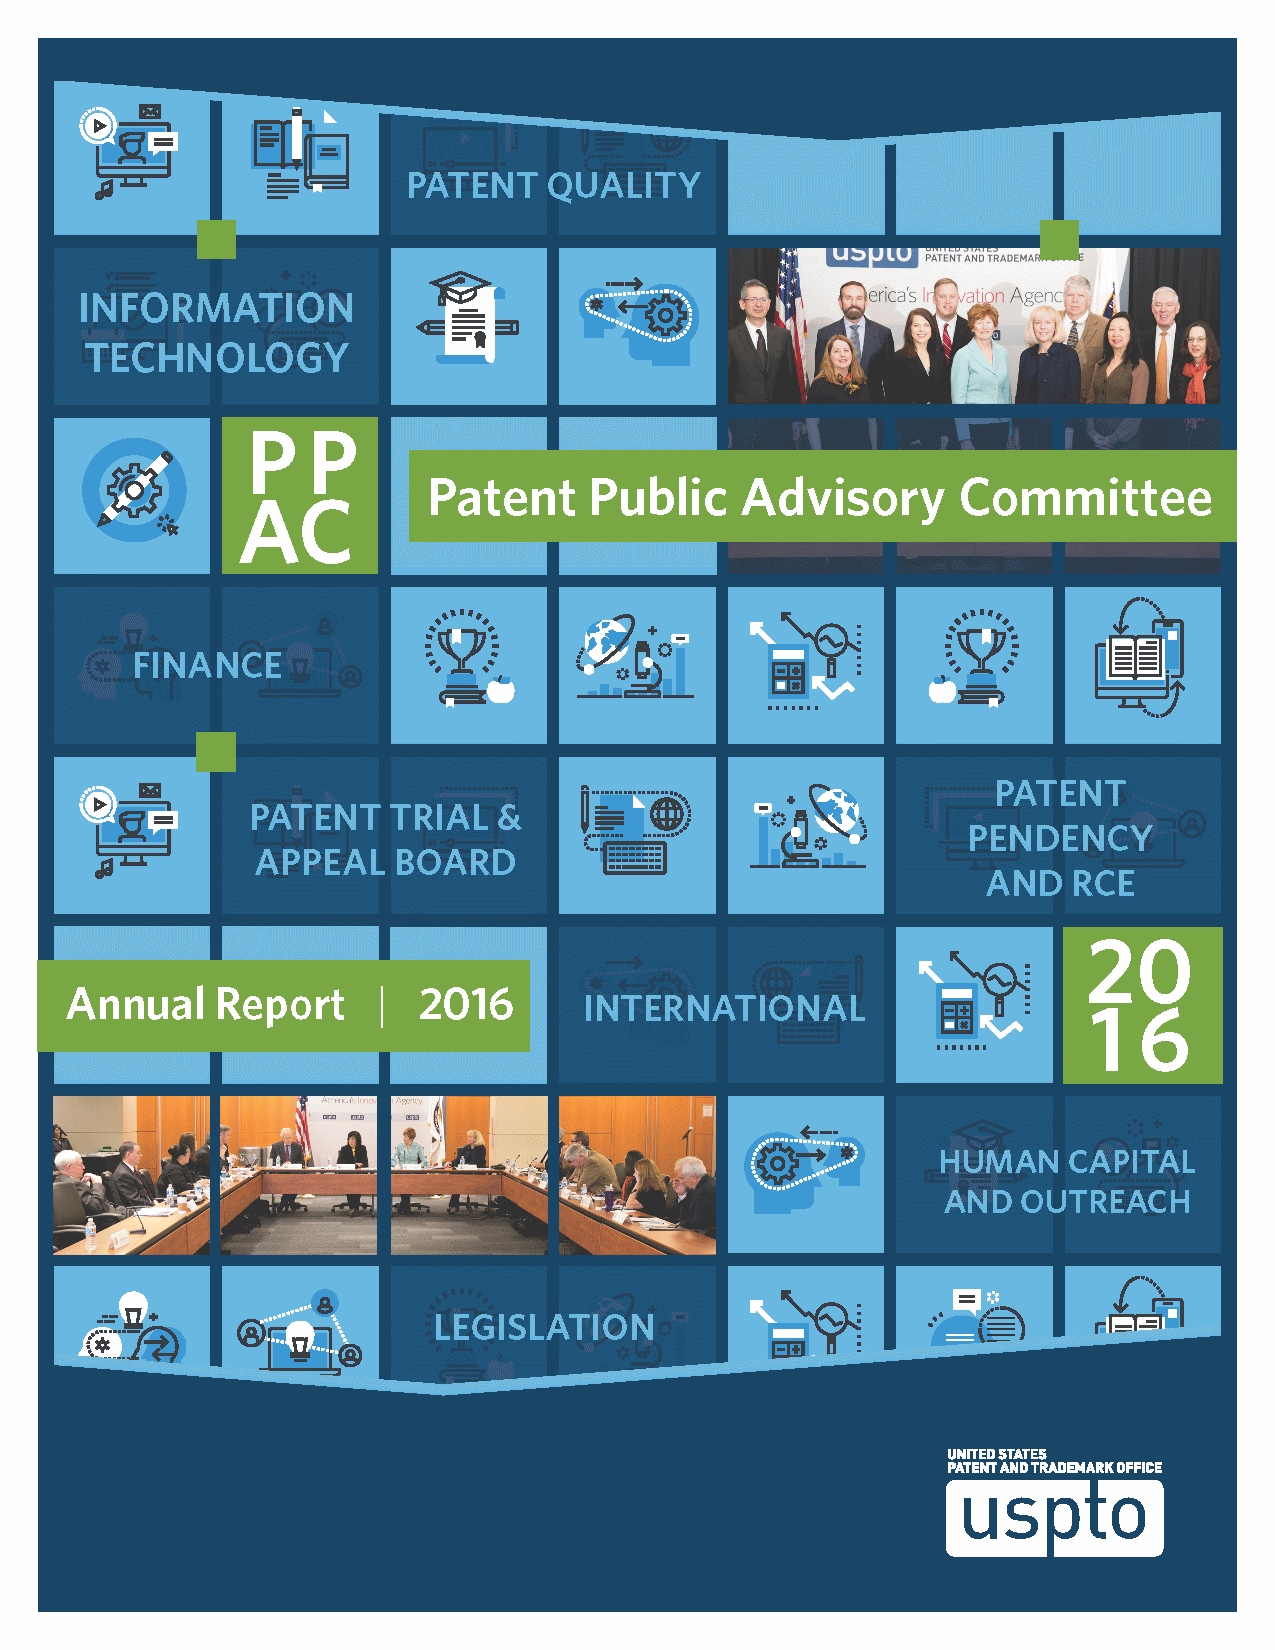 PPAC Patent Public Advisory Committee